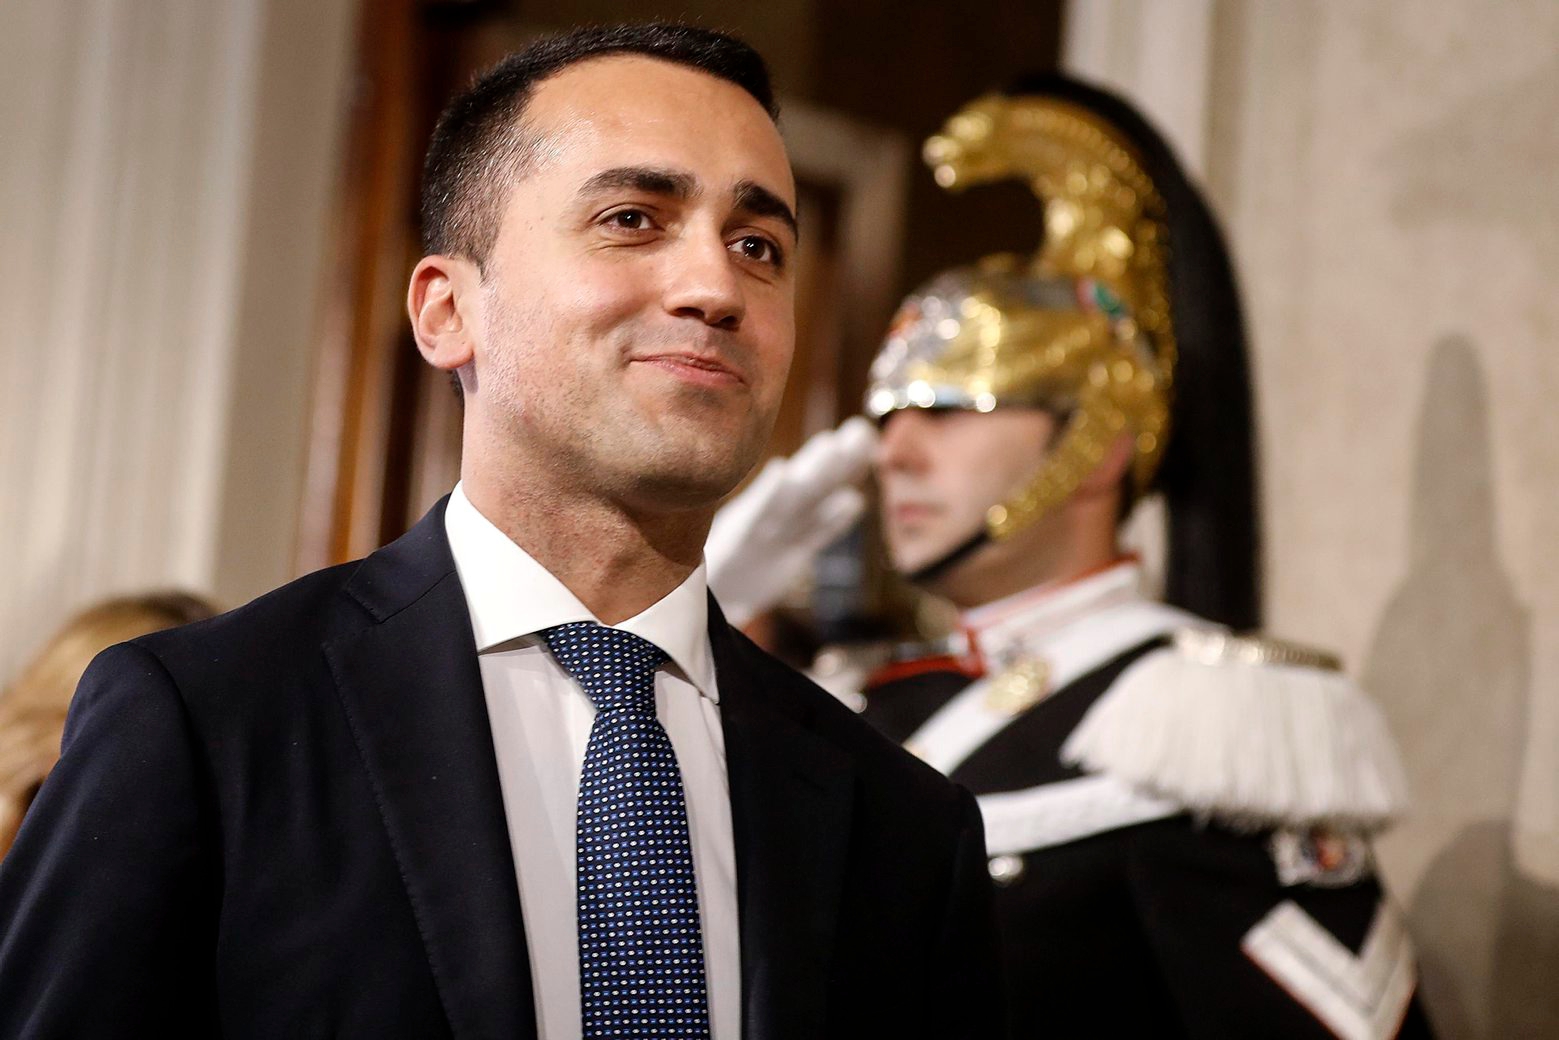 Five-Star Movement leader Luigi Di Maio addresses the media after a meeting with Italian President Sergio Mattarella, at the Quirinale presidential palace, in Rome, Monday, May 14, 2018. The leader of the euro-skeptic 5-Star Movement asked ItalyÄôs president on Monday for more time to hammer out a coalition deal with the head of a rival populist party, saying he also wants his voter base to have their say online about the accord before any government is formed. (Riccardo Antimiani/ANSA via AP) Italy Politics